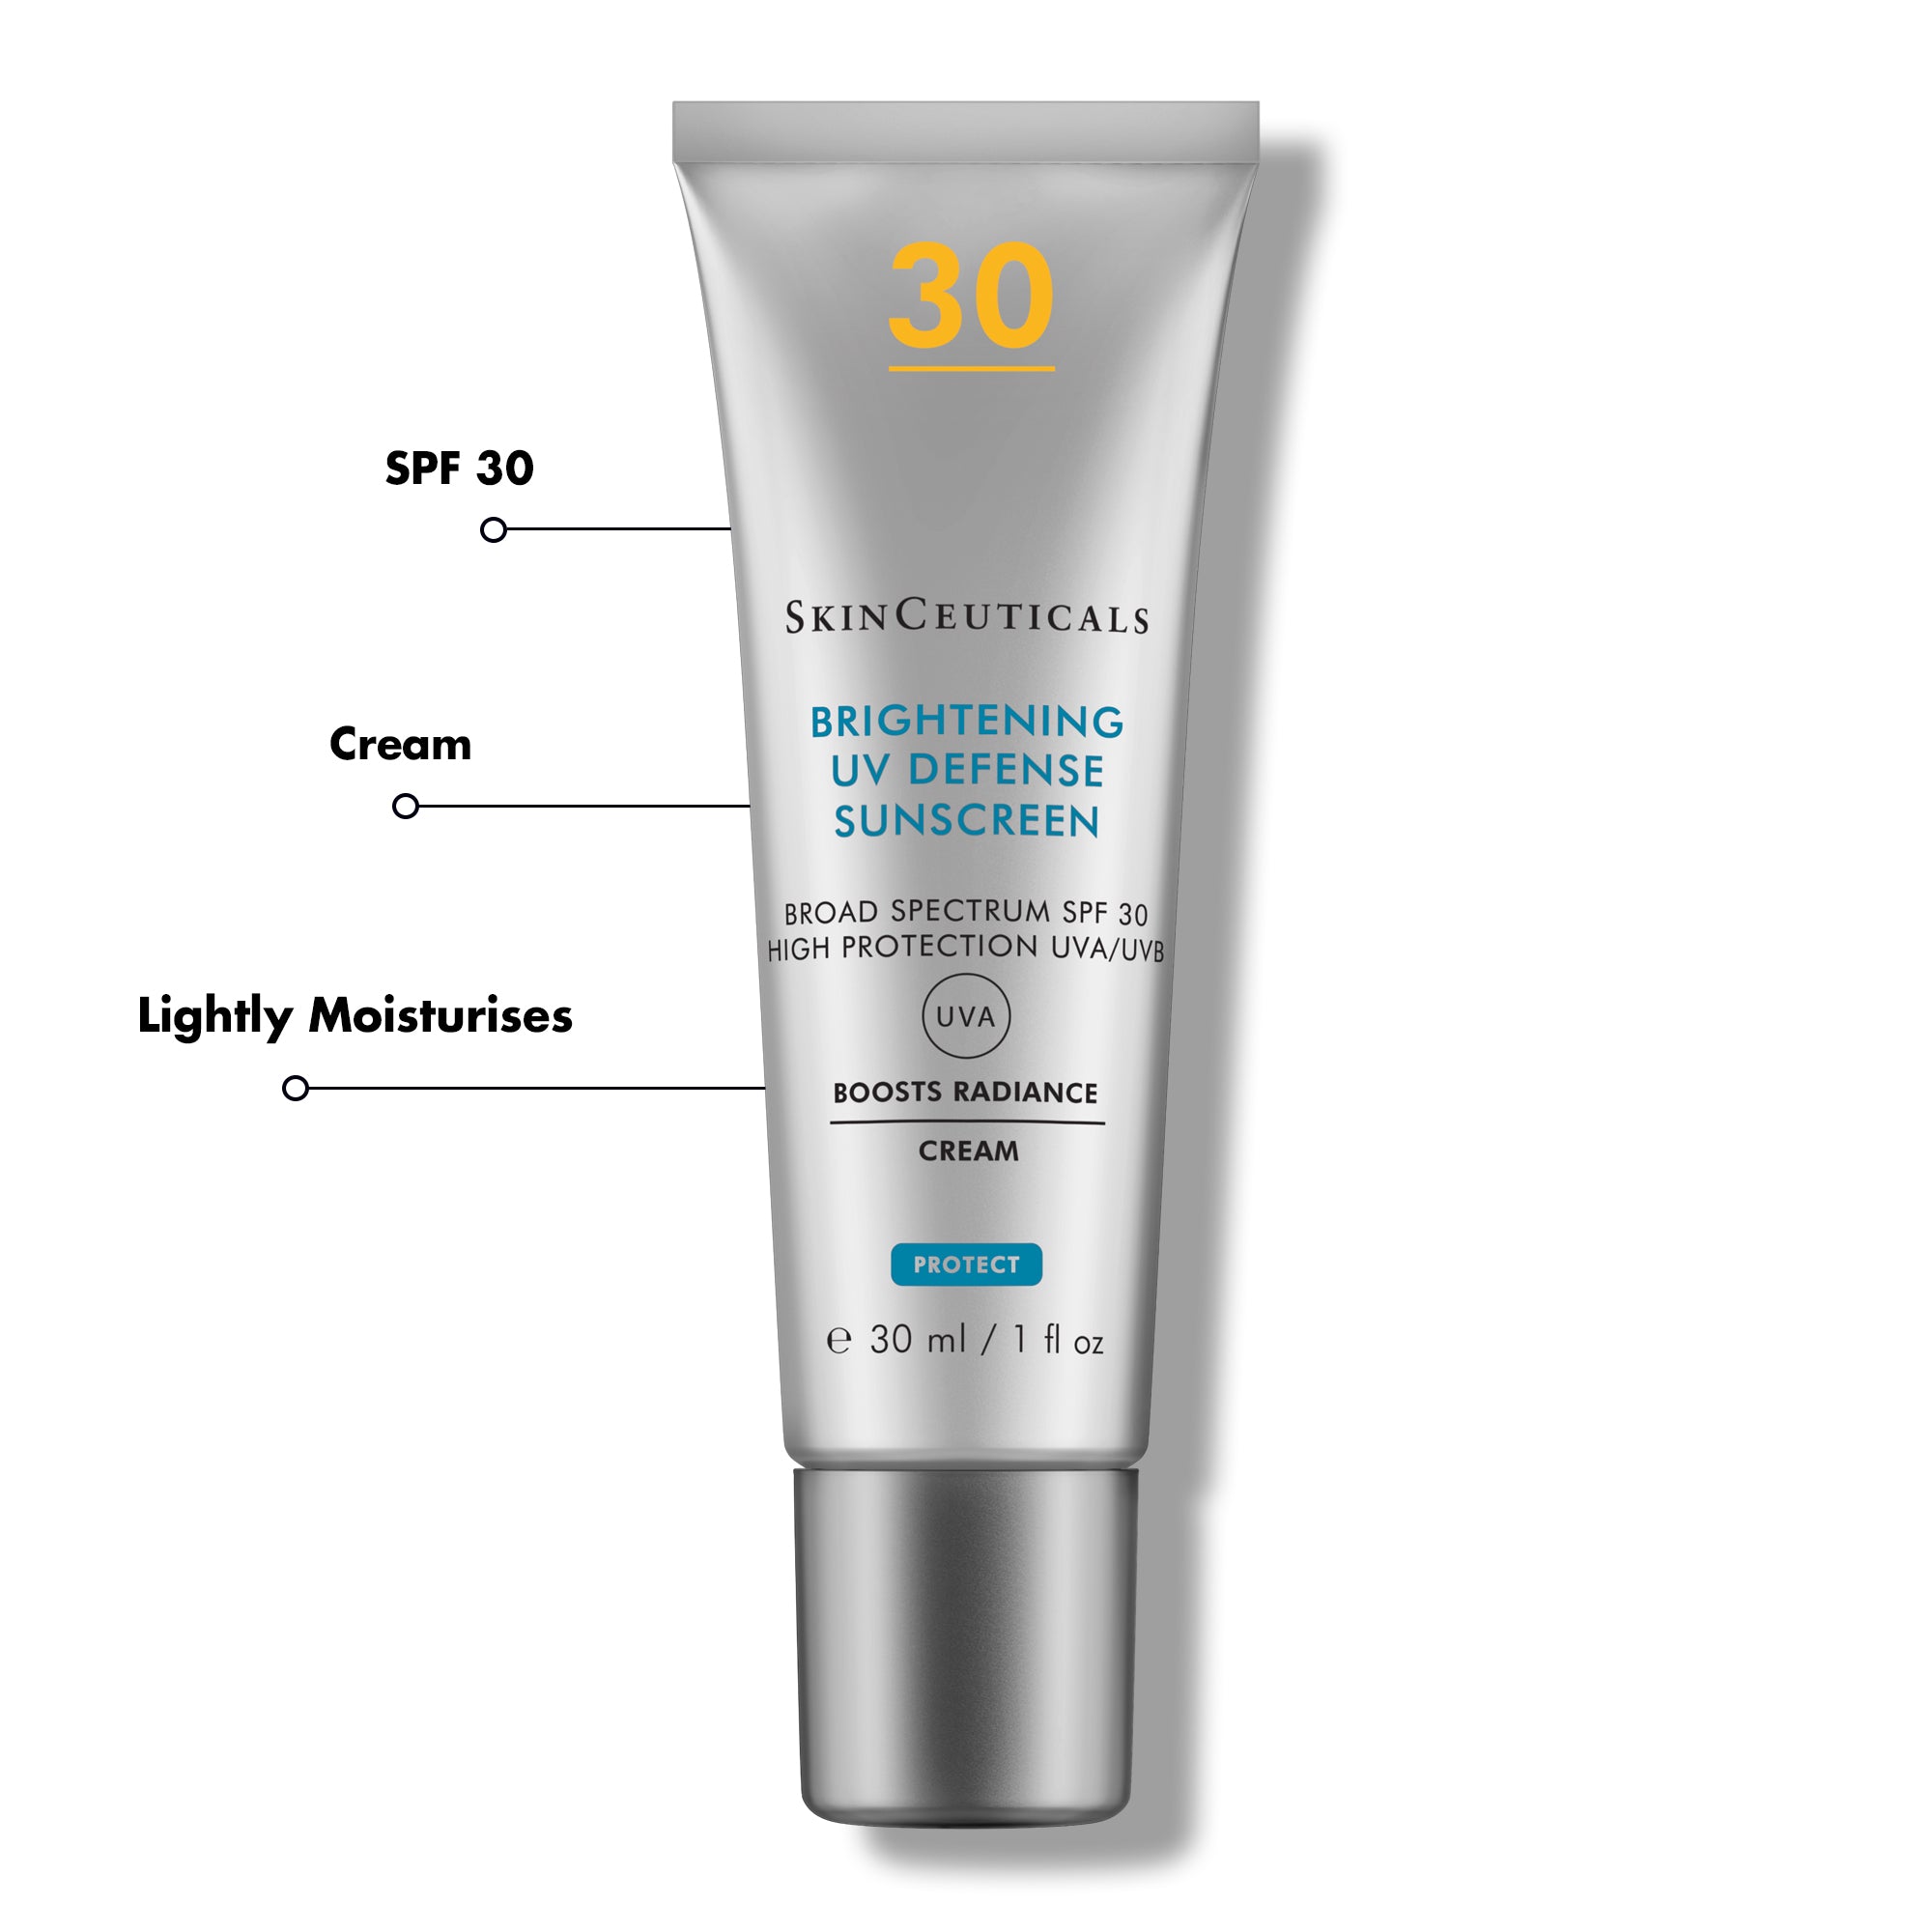 SKINCEUTICALS Brightening UV Defense SPF30 30ml: Shield and brighten your skin with SKINCEUTICALS Brightening UV Defense, a lightweight sunscreen that provides broad-spectrum protection against UV rays while helping to minimize the appearance of dark spots and uneven skin tone for a more radiant and luminous complexion.